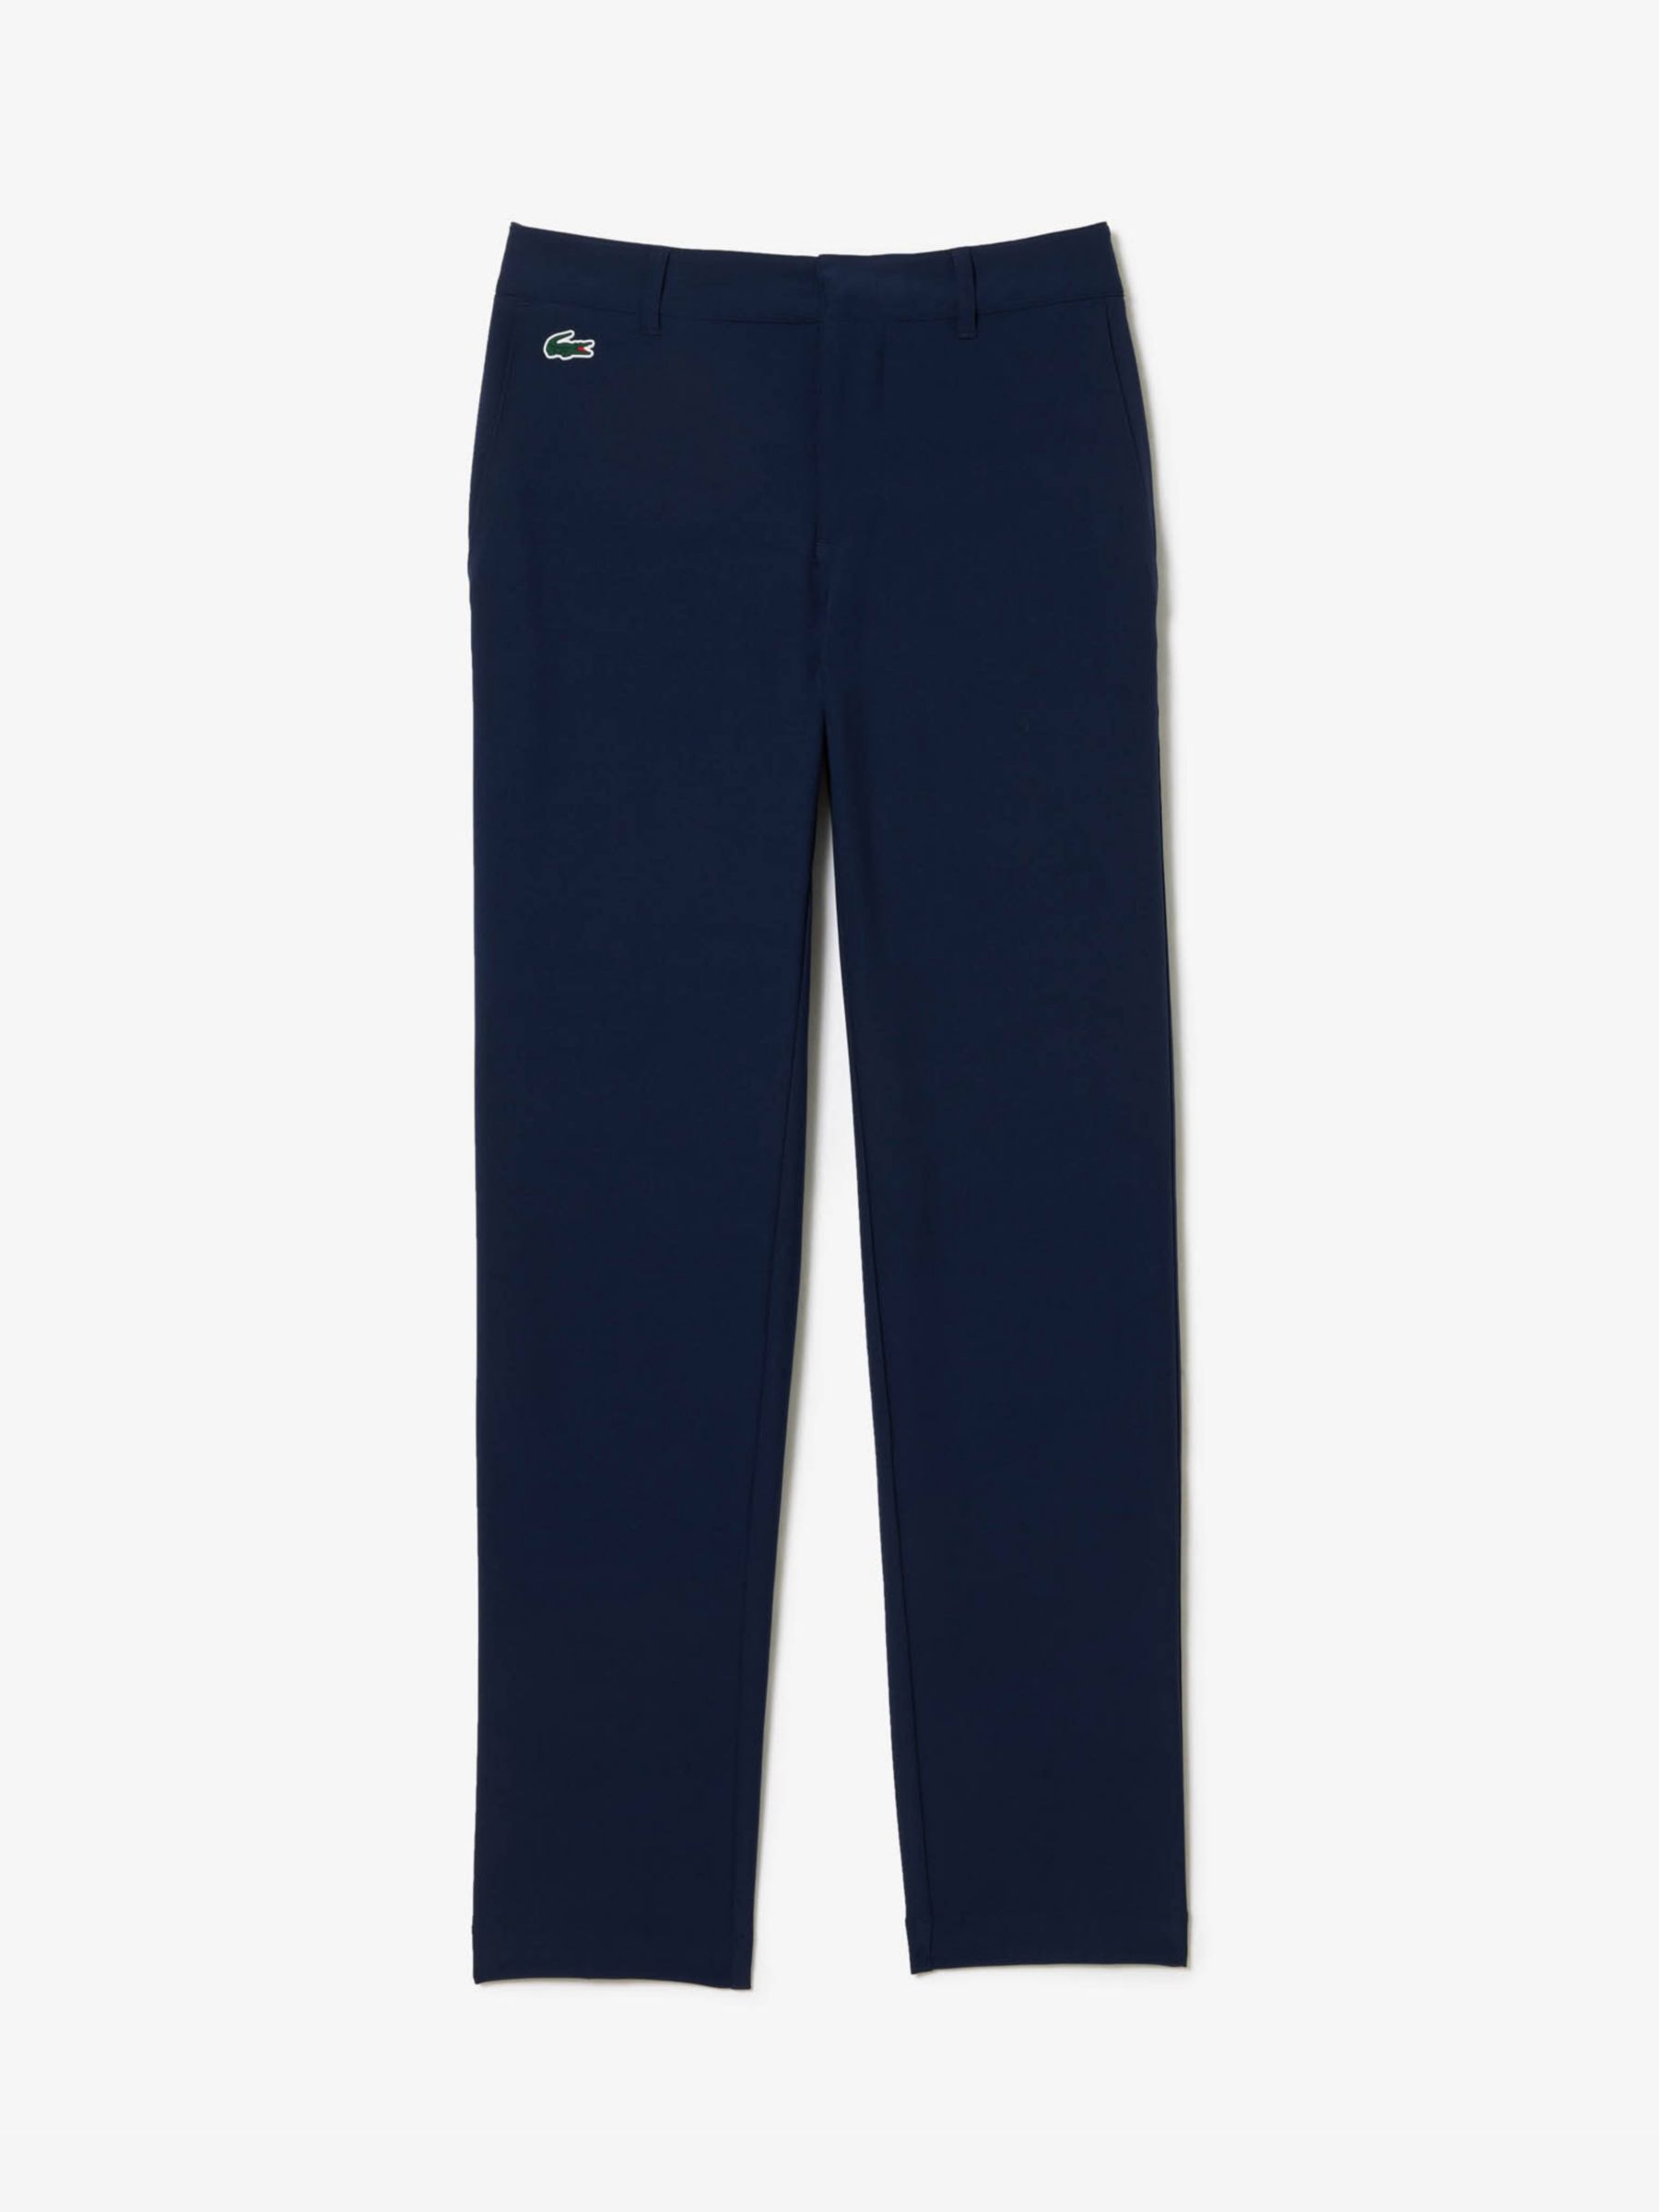 Buy Lacoste Golf Essentials Trousers, Navy Online at johnlewis.com